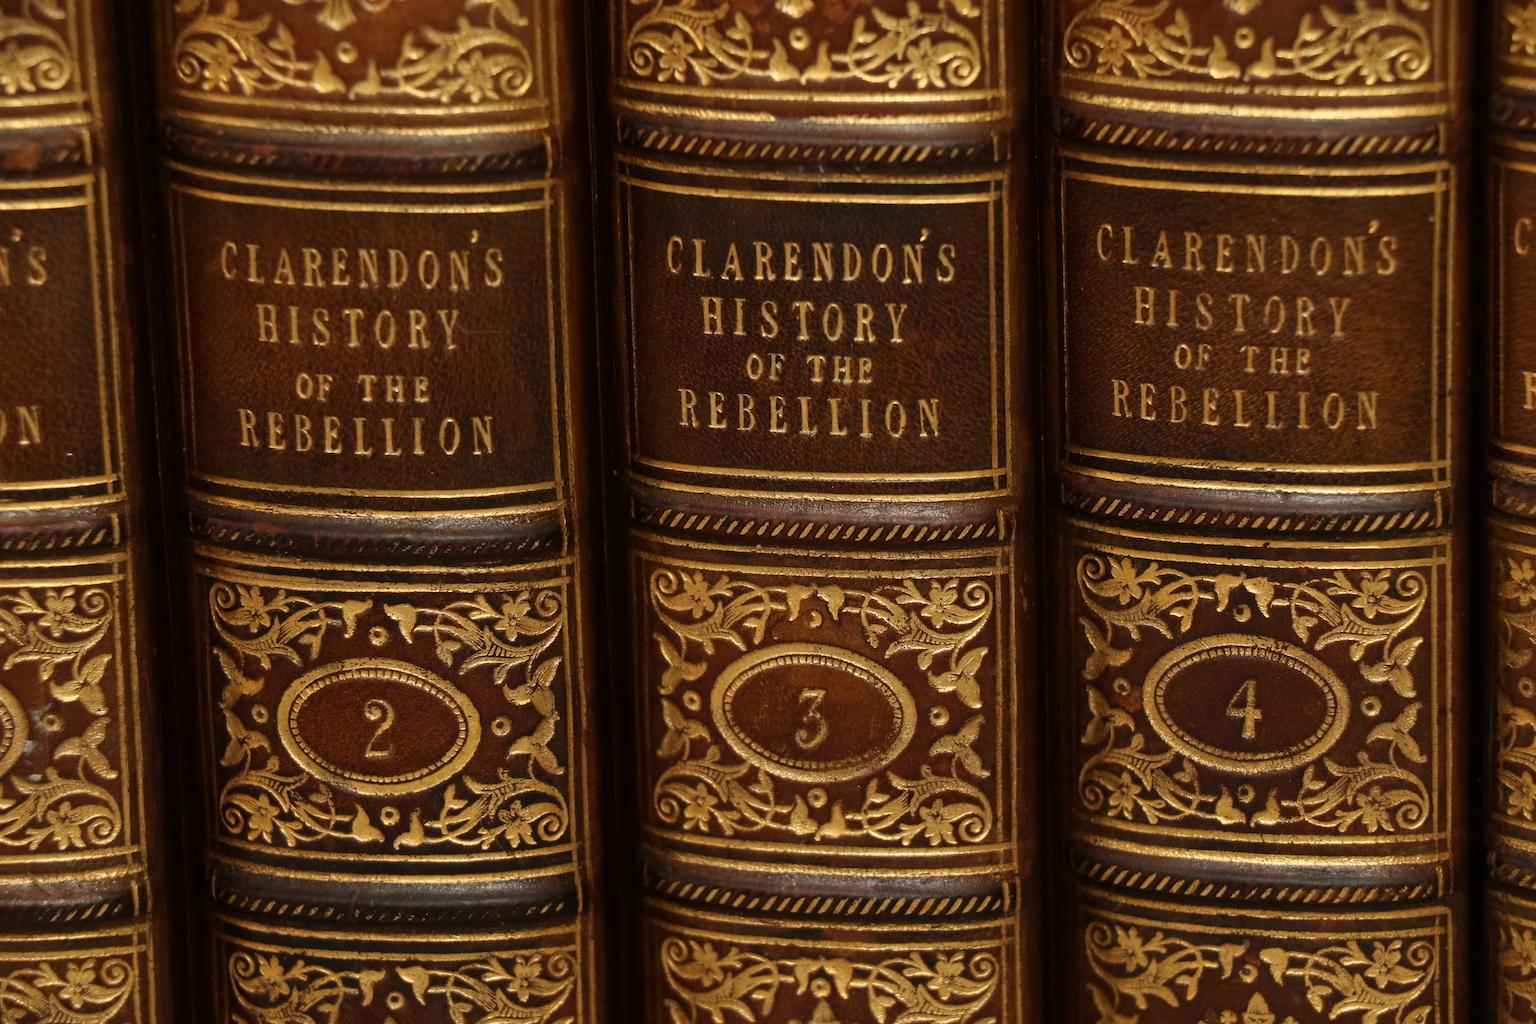 8 volumes. Bound in full tan polished calf with marbled edges, raised bands, and ornate gilt tooling on spines. Published in Oxford by Clarendon Press in 1826.